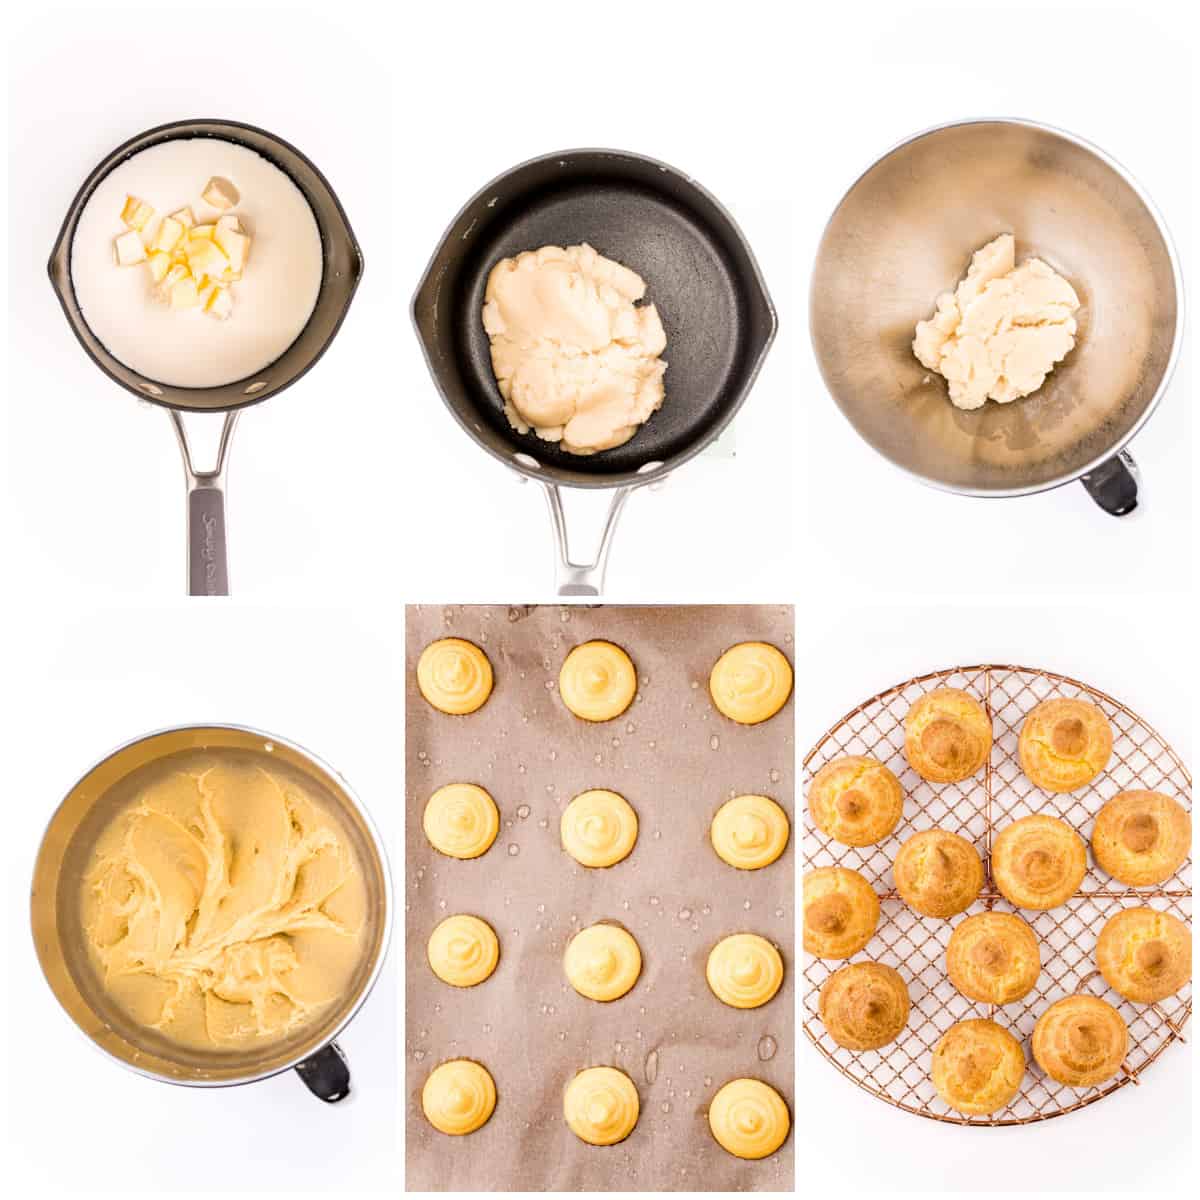 Step by step photos on how to make a Cream Puff Recipe.